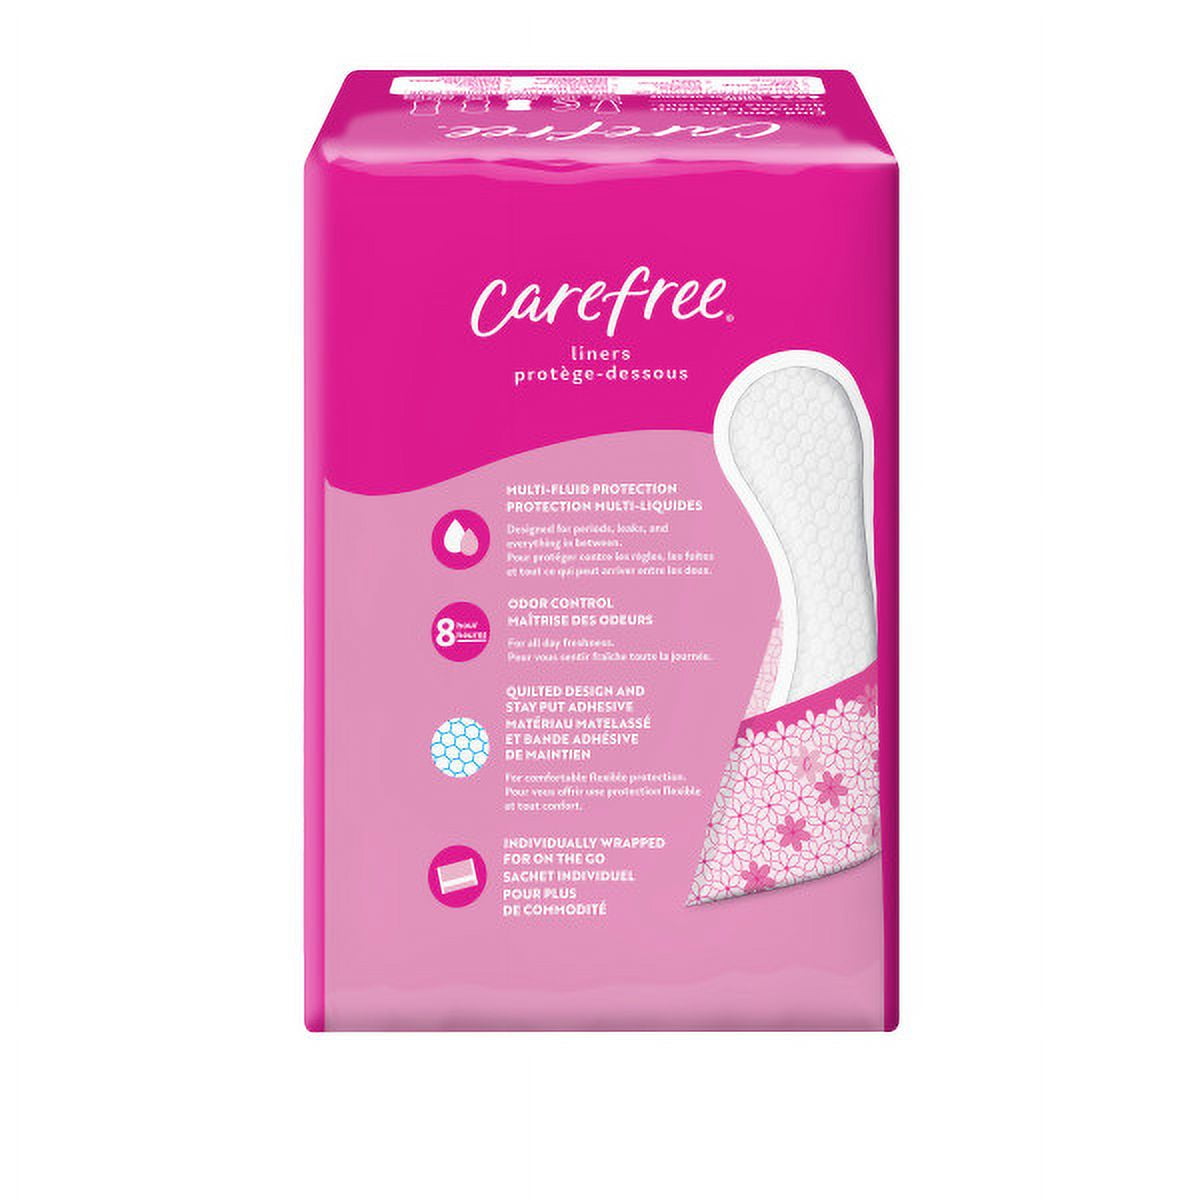 CAREFREE® Panty Liners, Regular, Unscented, 8 Hour Odor Control, 54ct